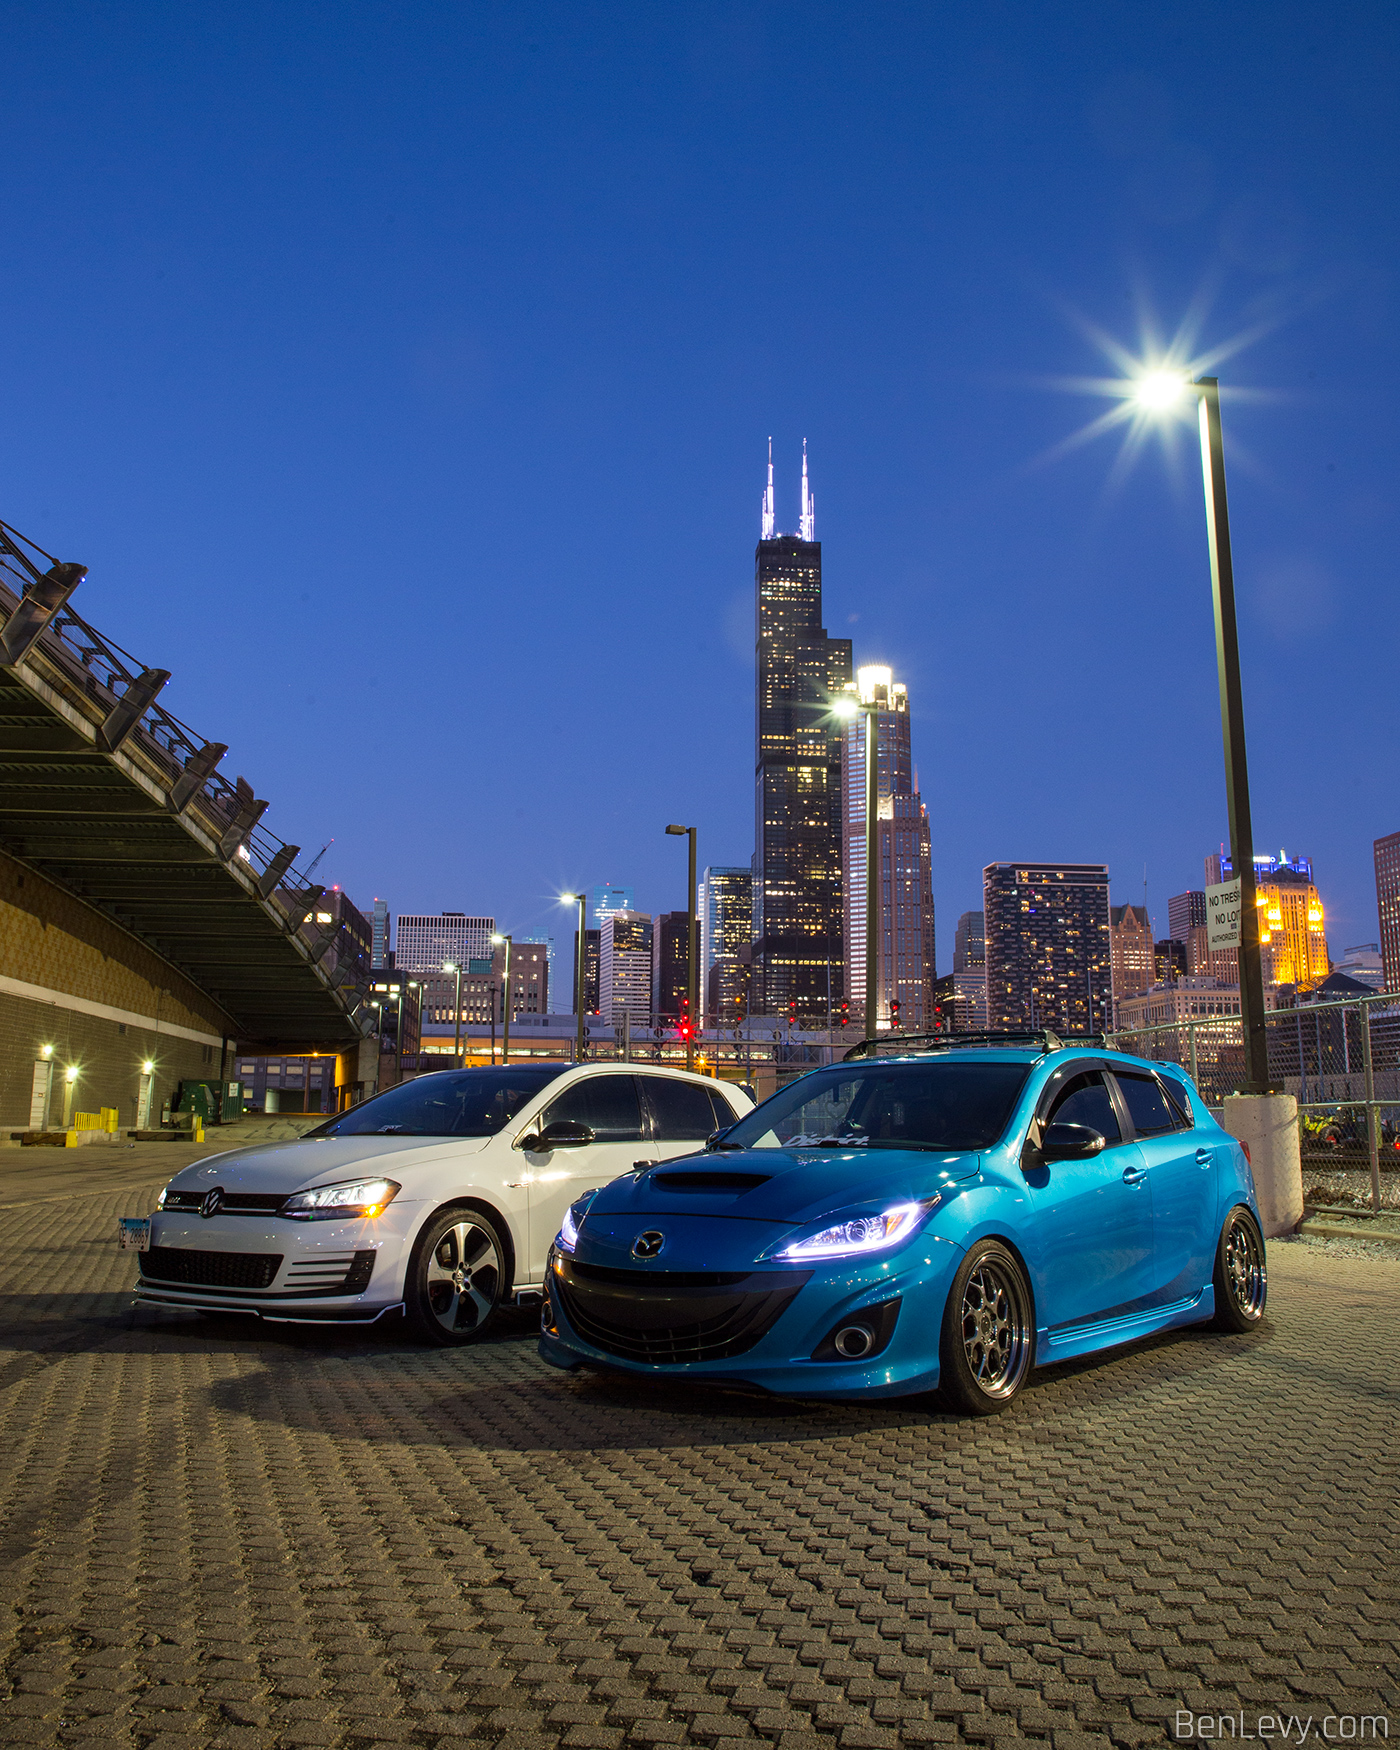 GTI and Mazdaspeed3 against the Chicago Skyline